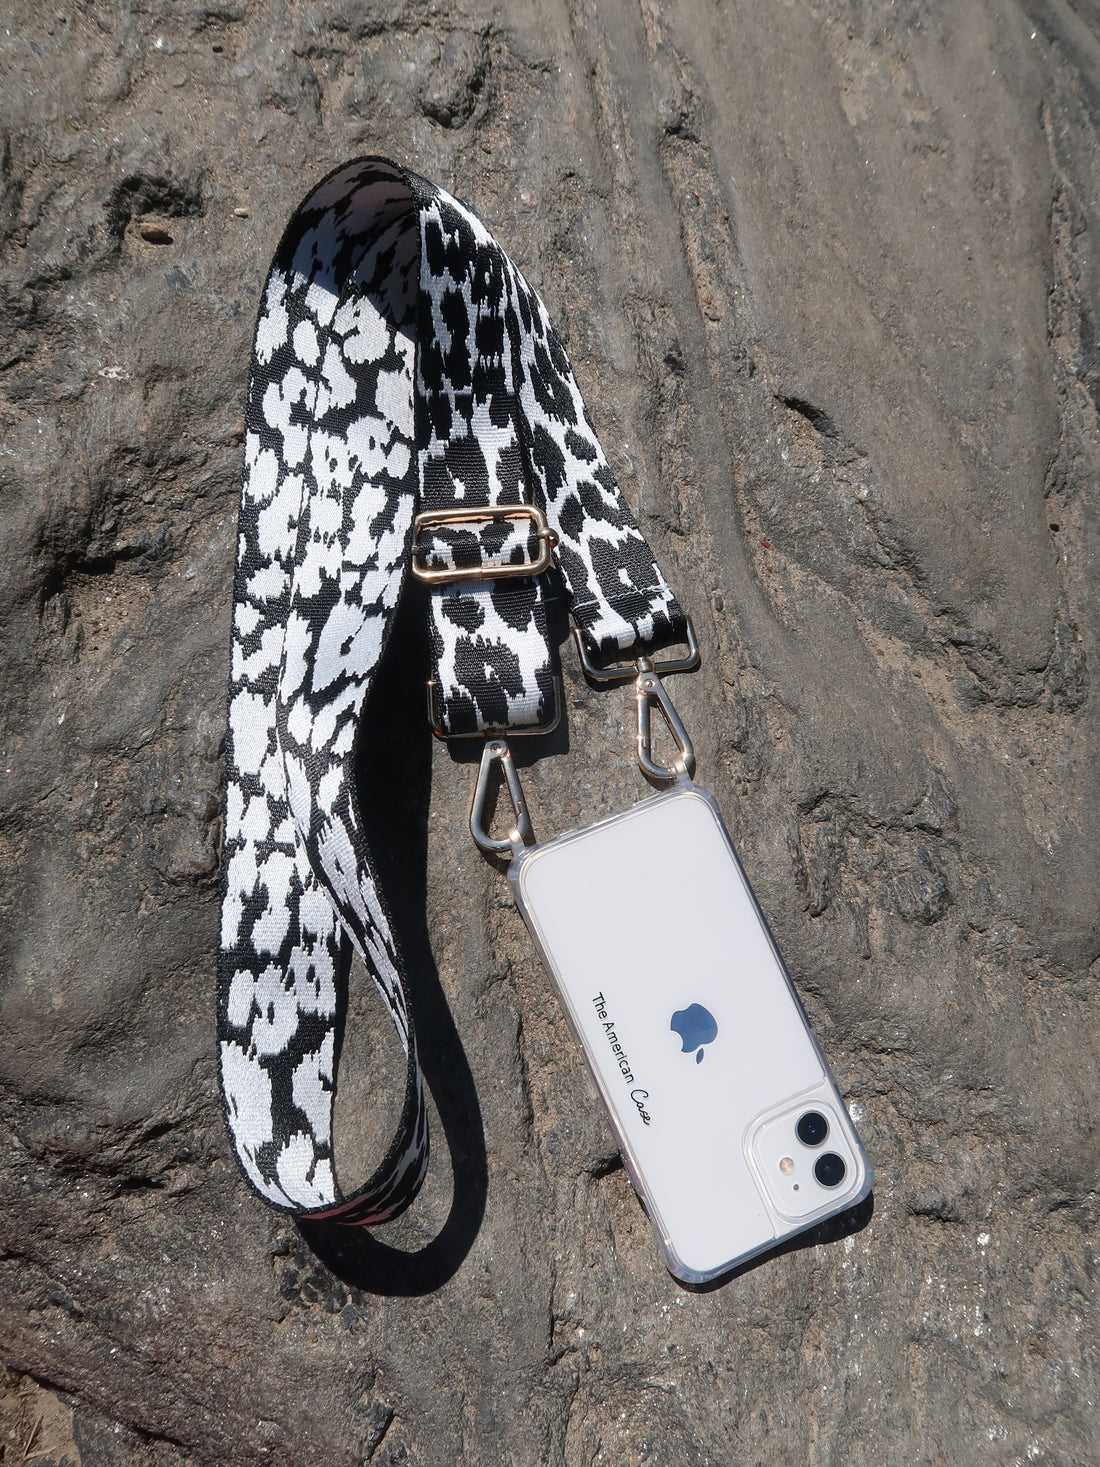 Adjustable black and white leopard Print Strap with Golden Carabiners attached to a clear The American Case phone case on a rock